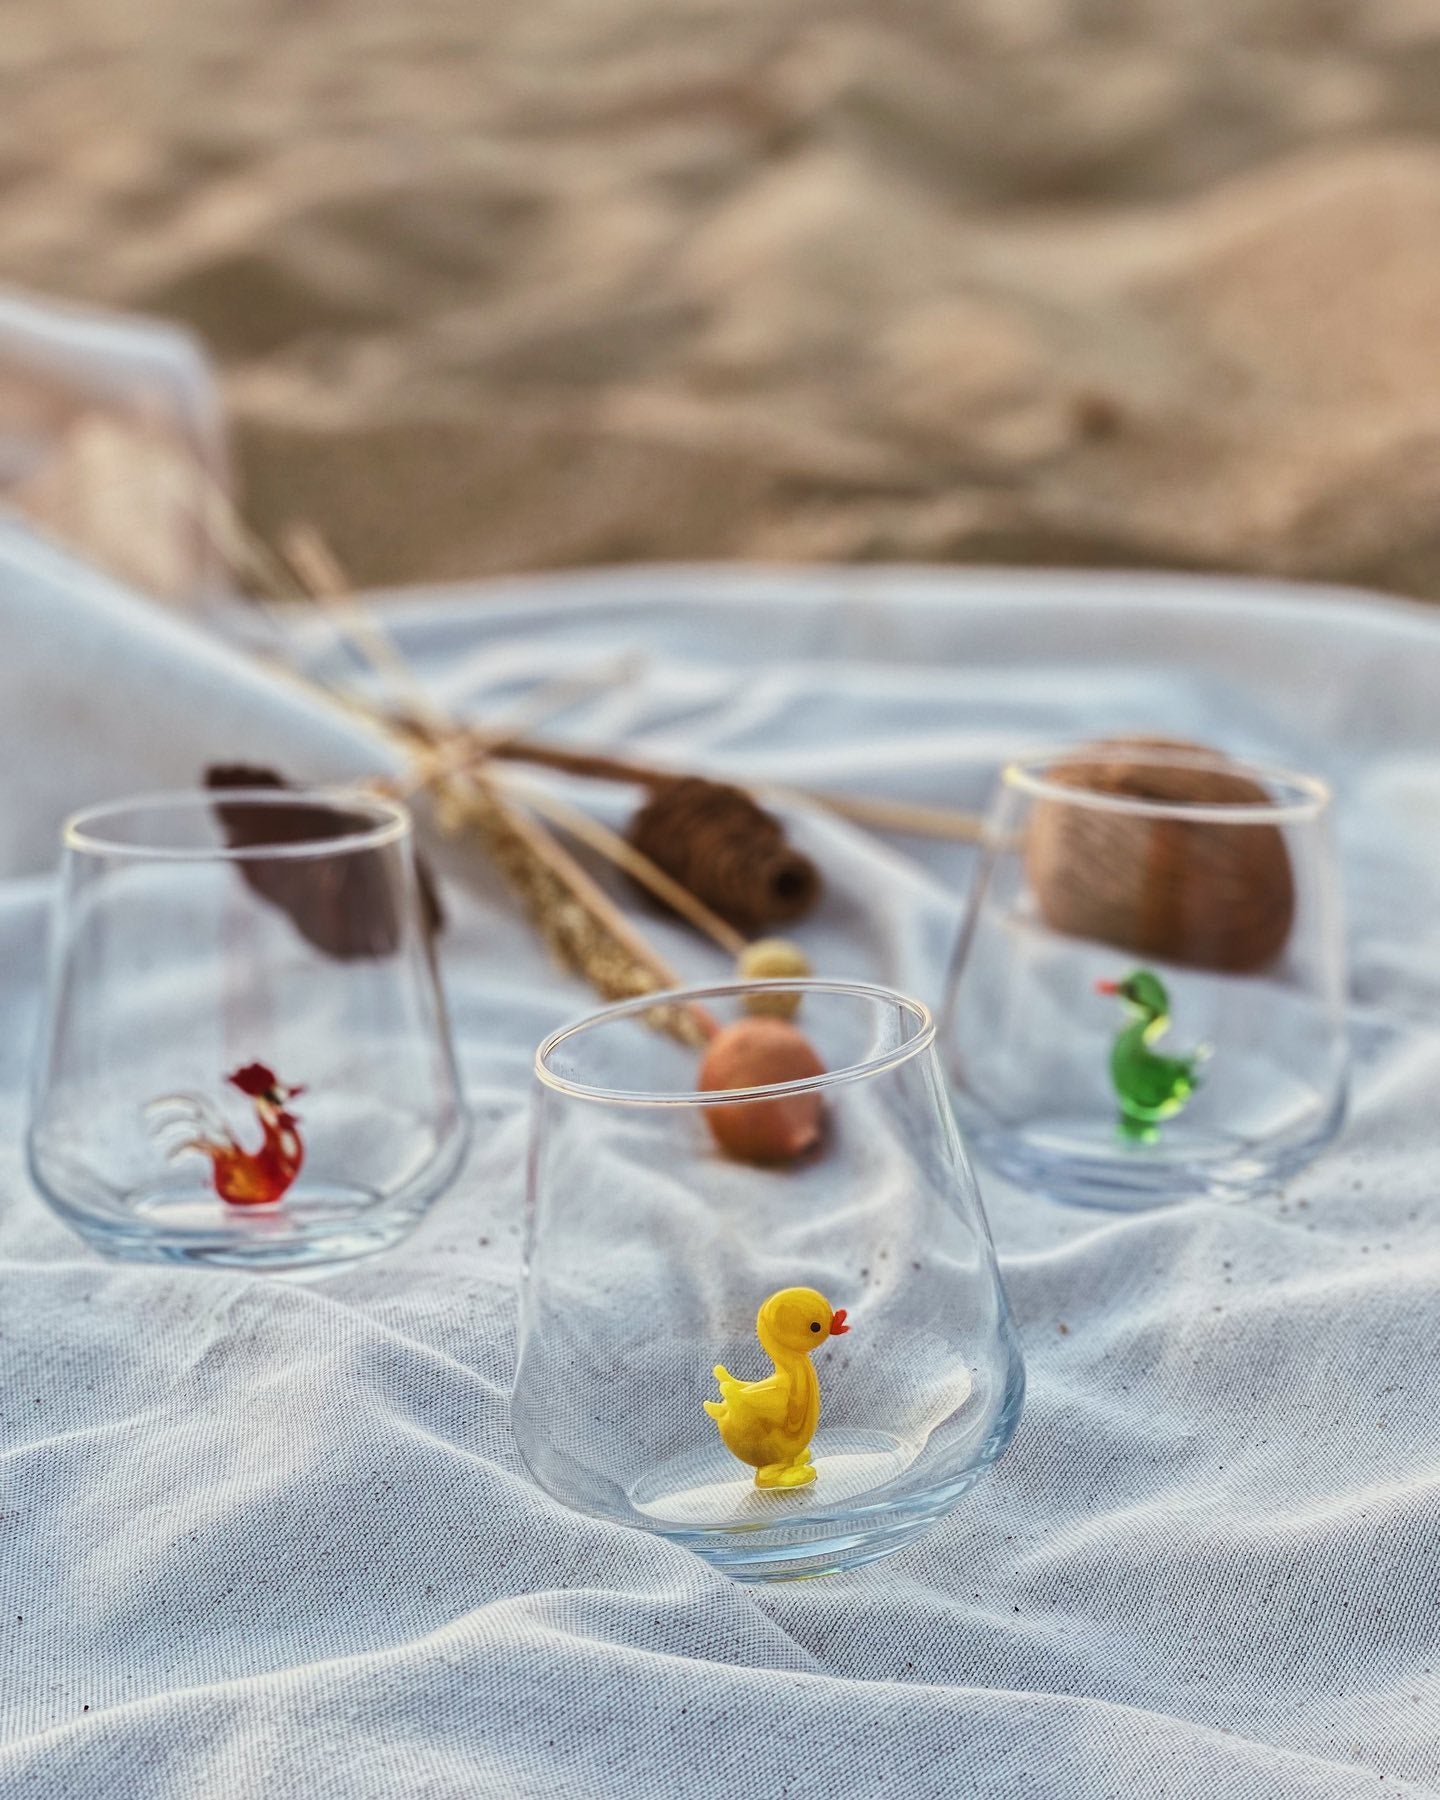 Premium Farmland 3D Animal Glass Drinking Cups for Sustainable